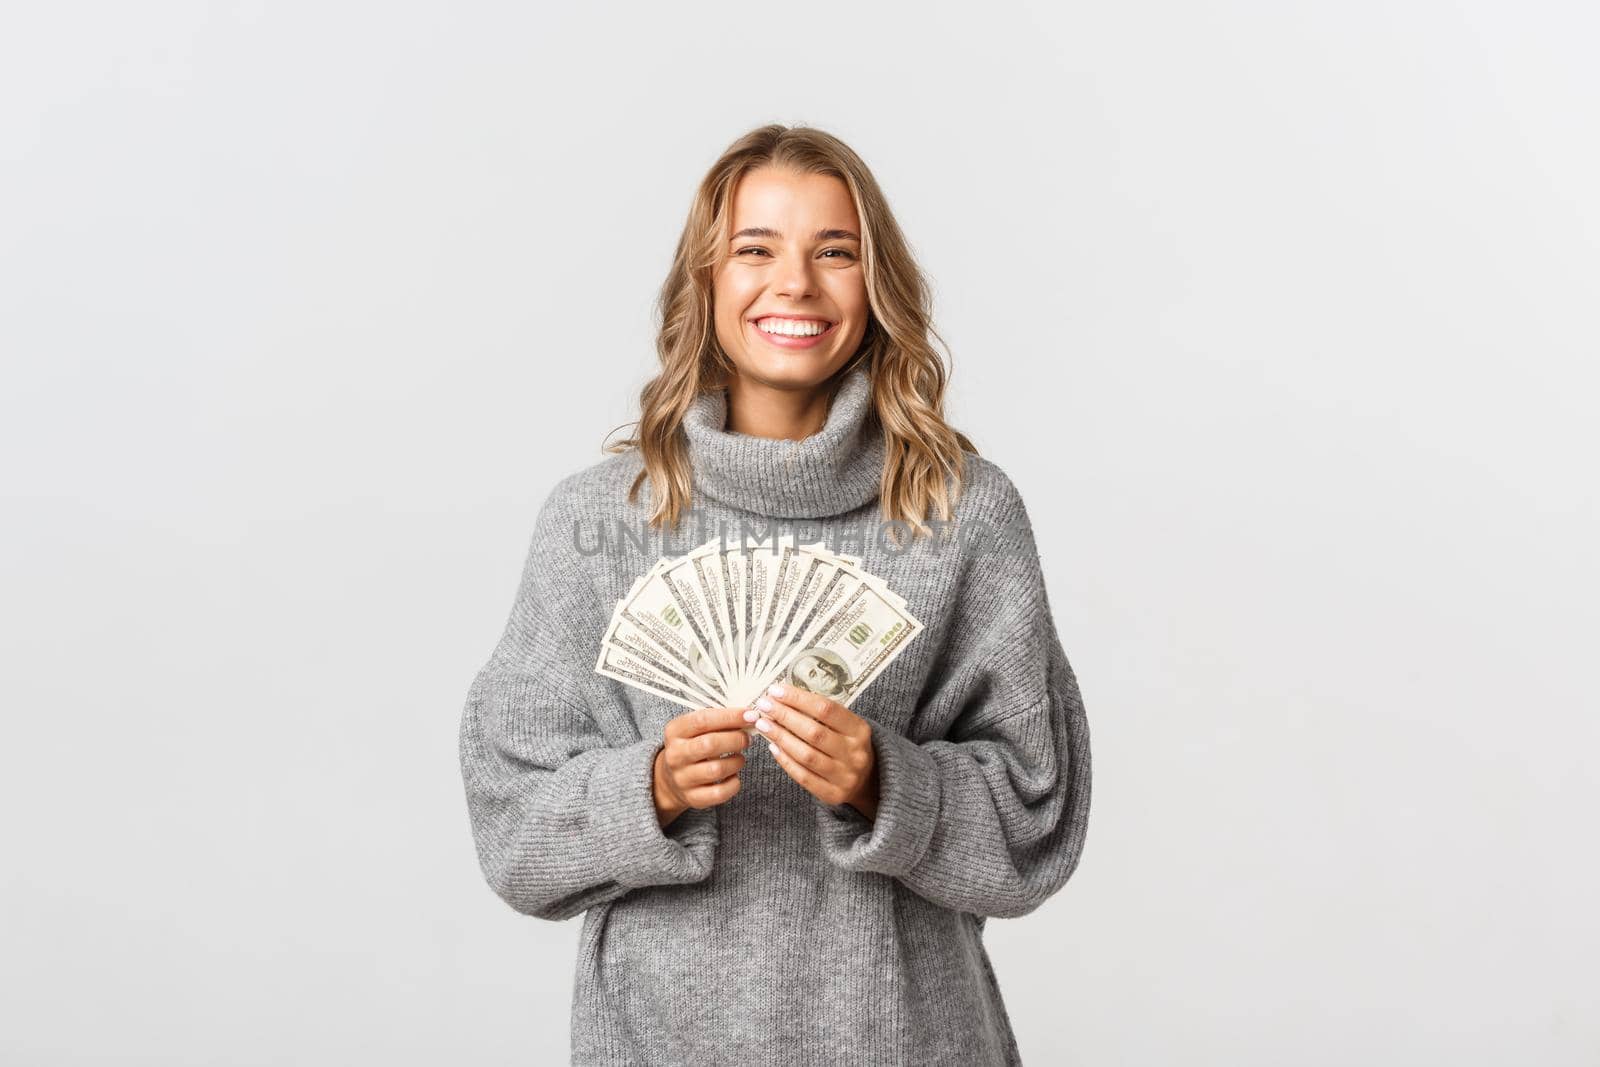 Close-up of happy beautiful woman in grey sweater, holding huge amount of cash, receiving money and smiling, white background.